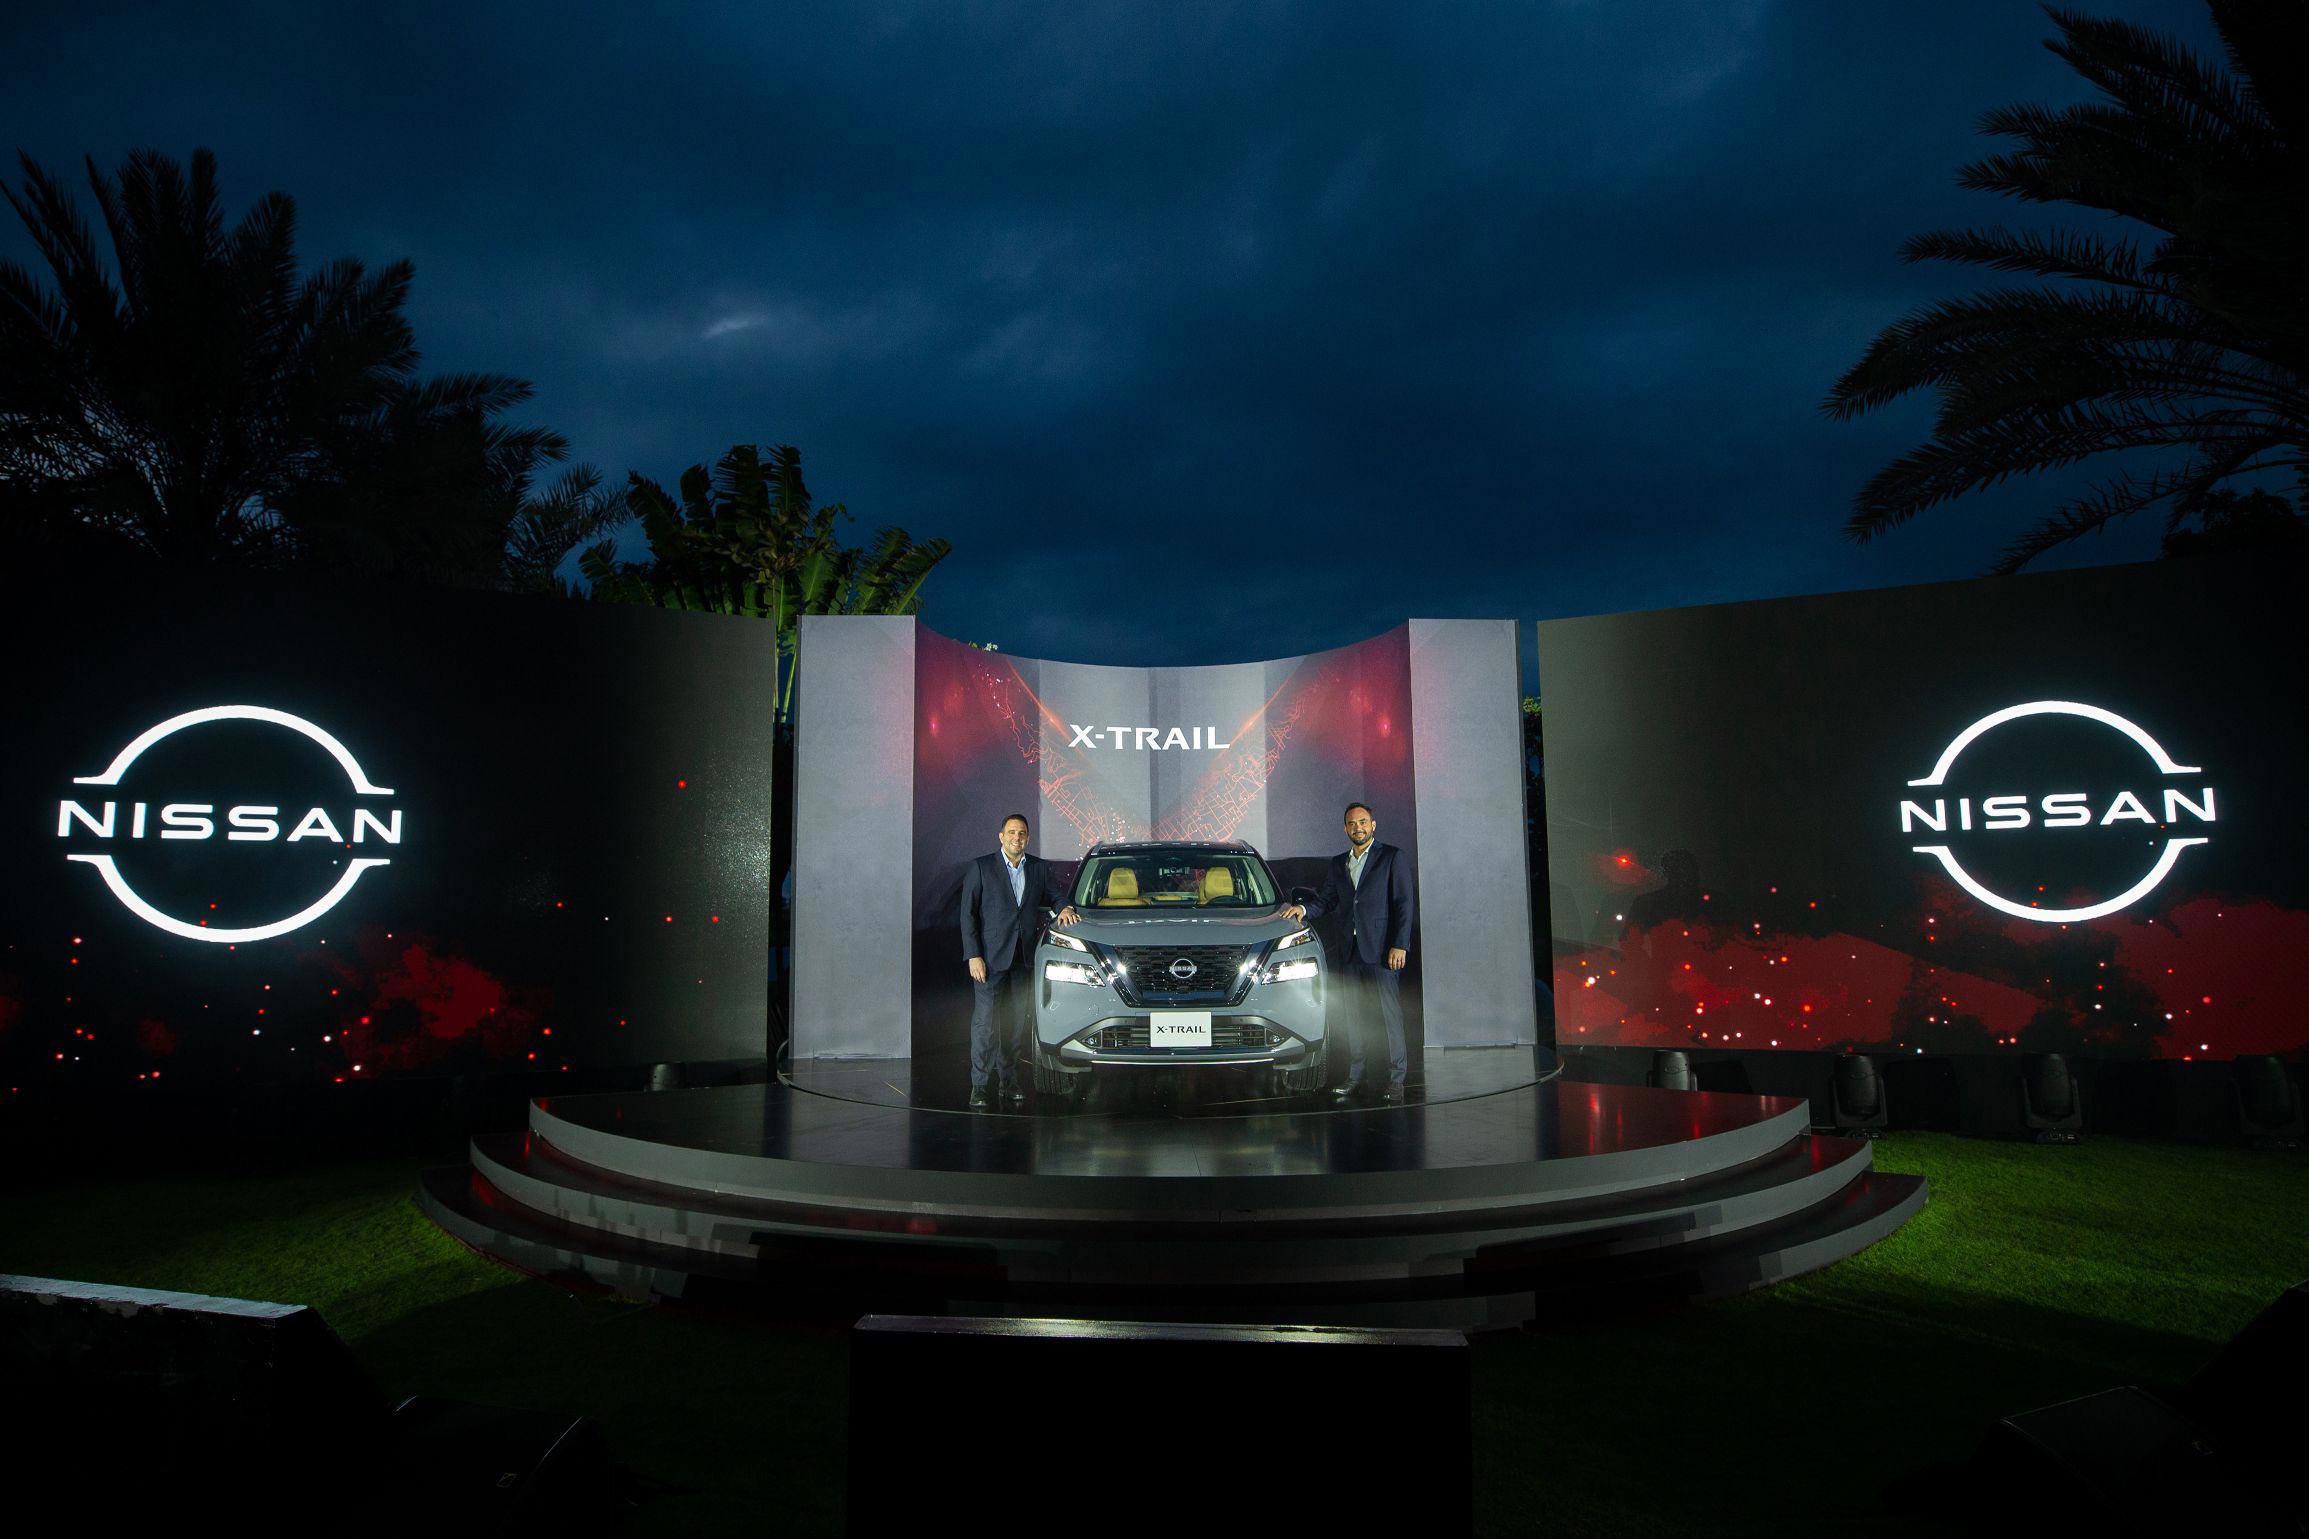 Nissan Al Babtain Launches the all-new 2023 Nissan X-TRAIL in Kuwait following the successful Middle East Launch in Saudi Arabia